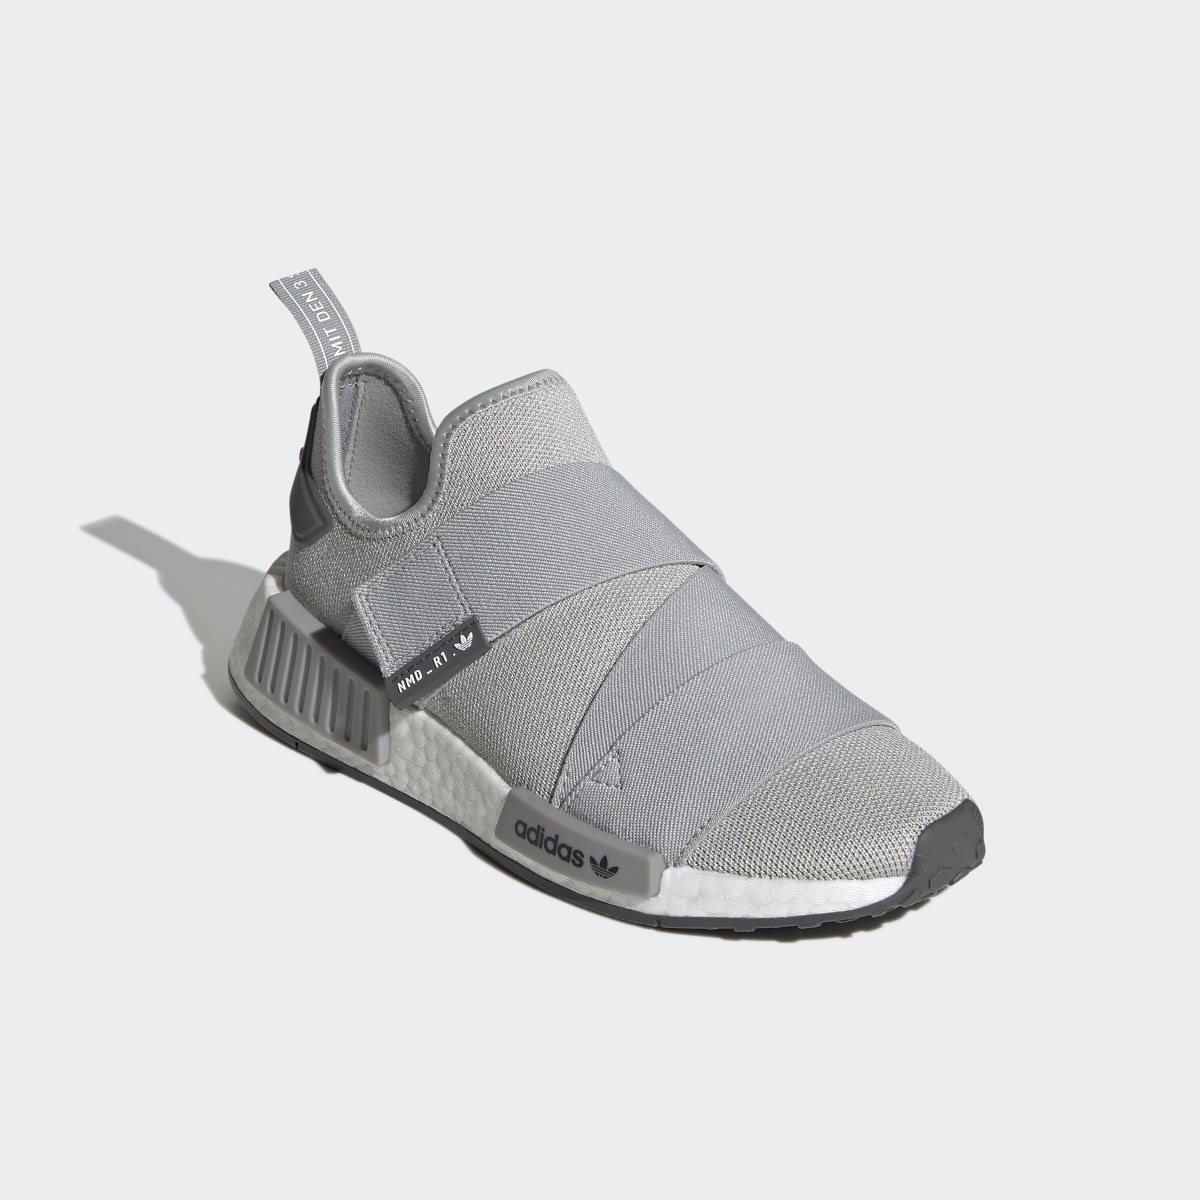 Adidas NMD_R1 Strap Shoes. 8